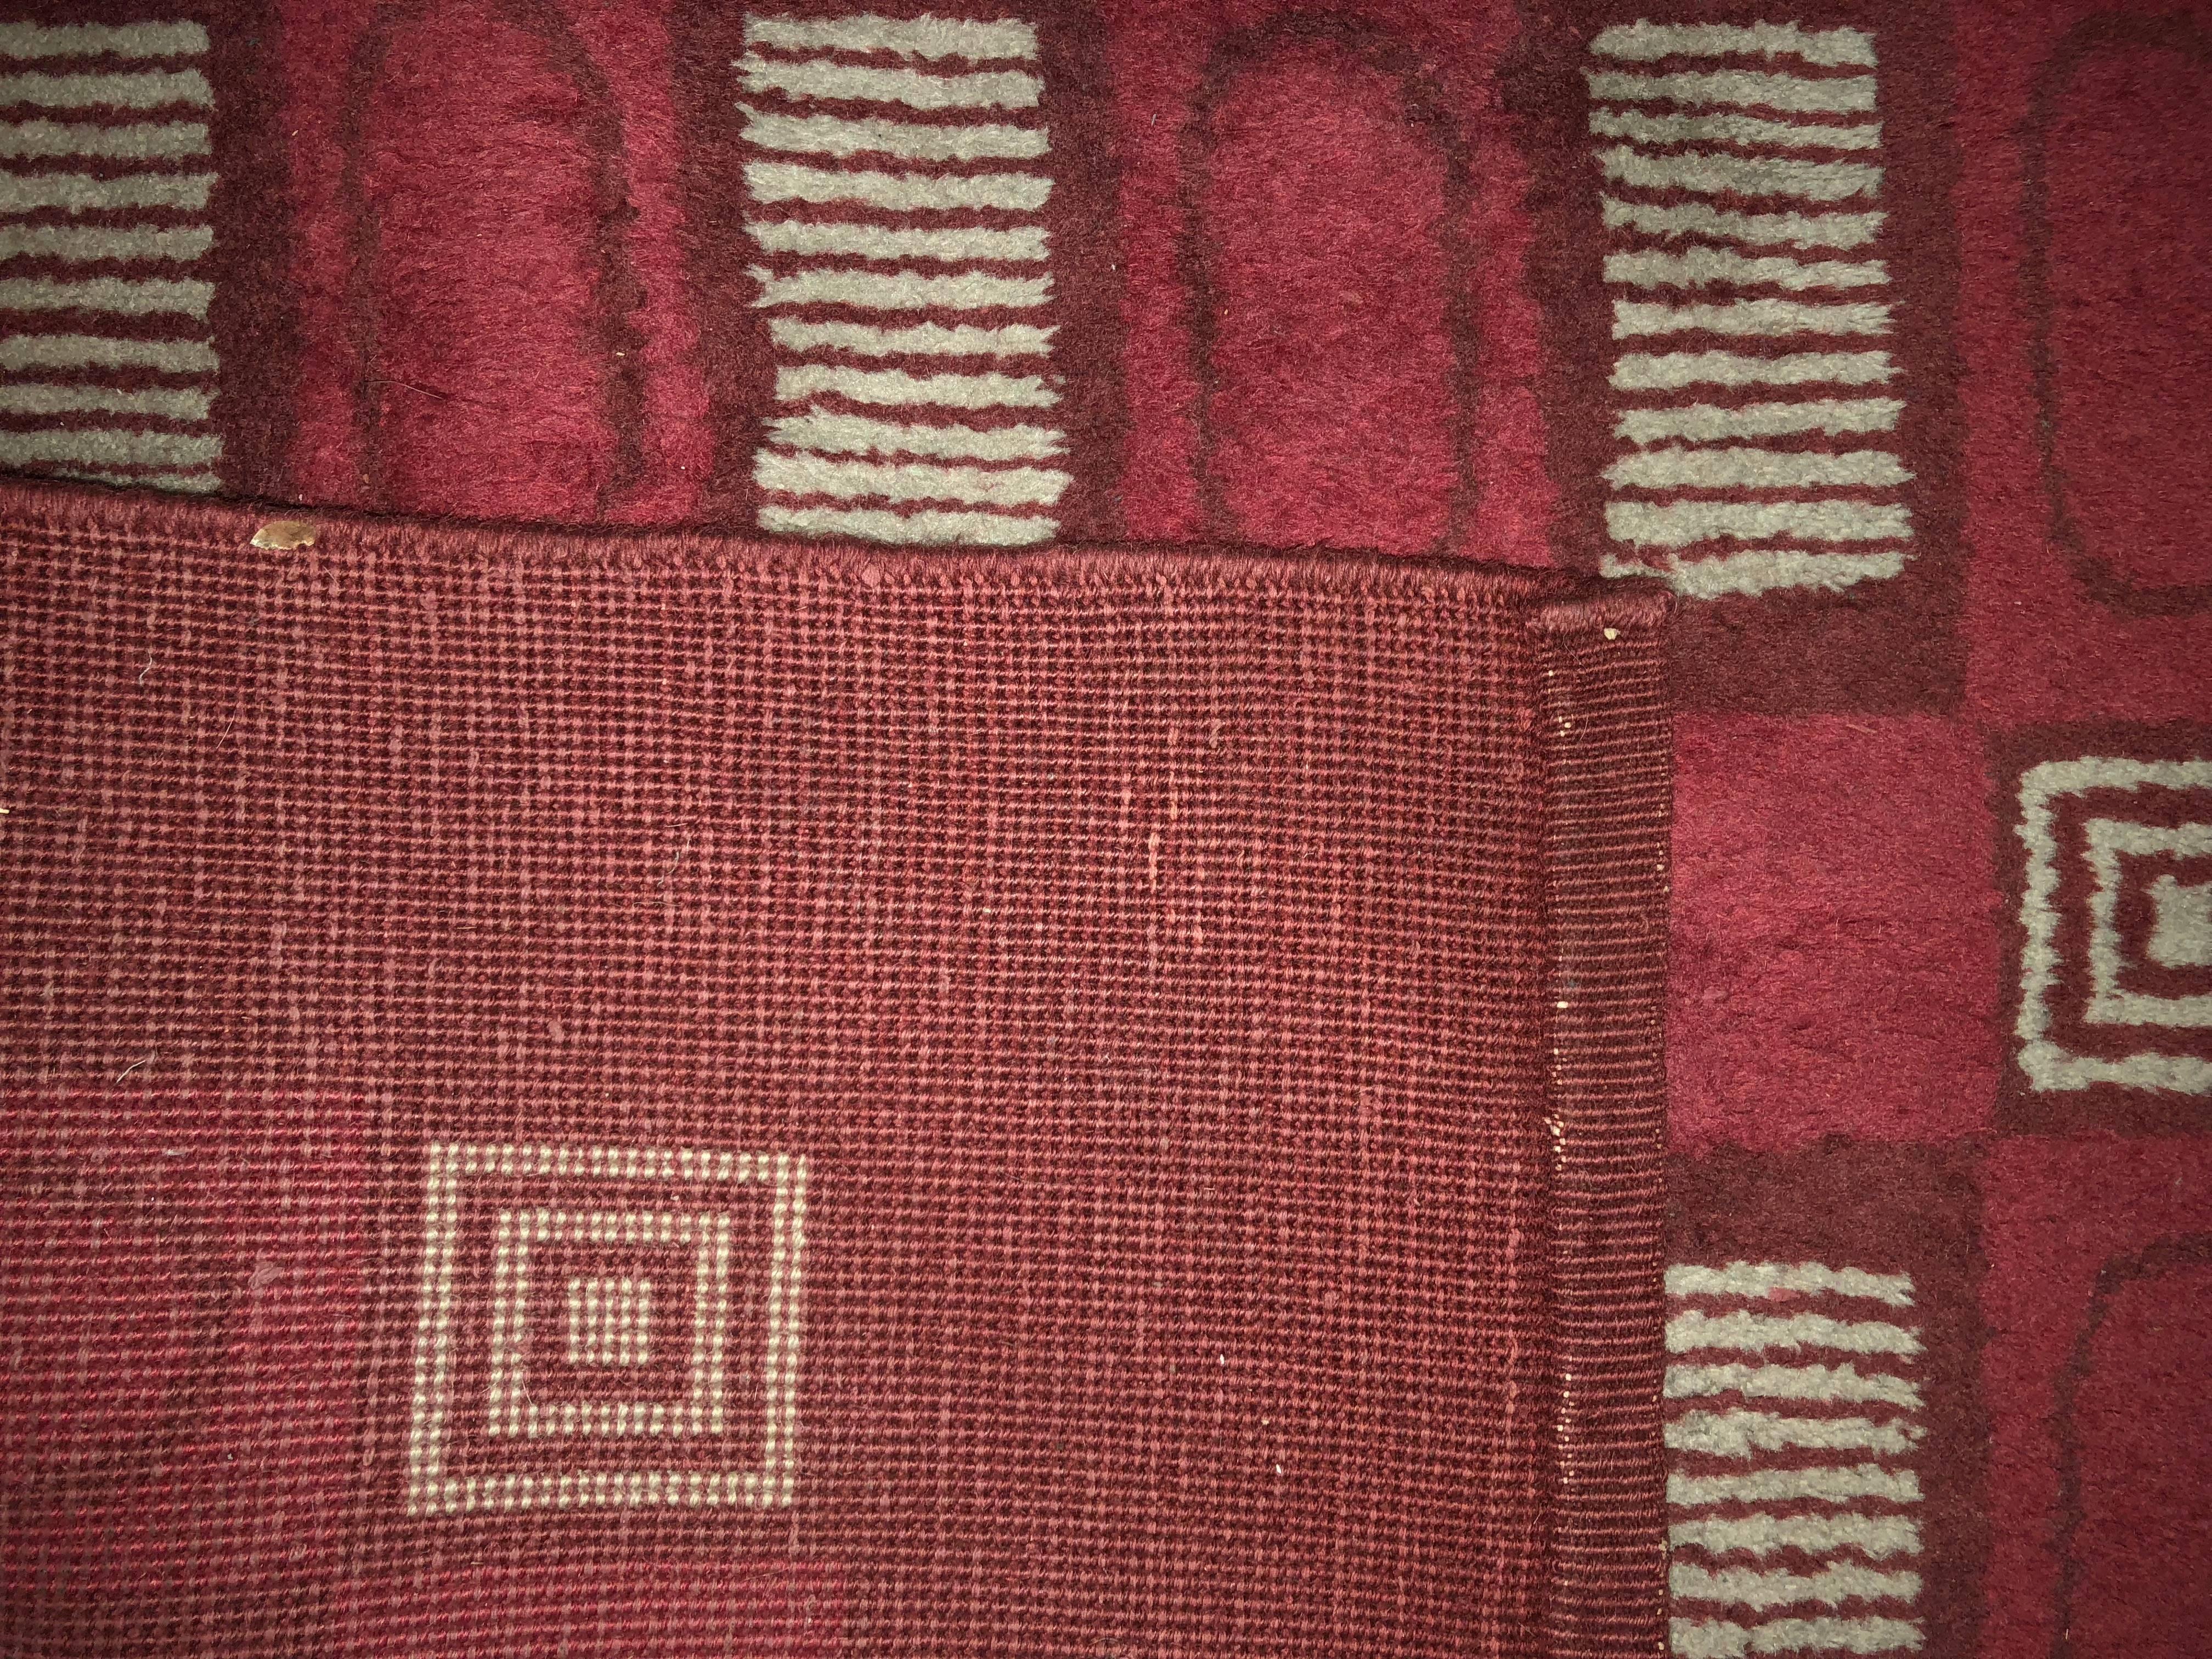 A Knotted woollen rug with red background, with beige geometrical patterns.

Provenance : Private Collection, an apartment Quai d'Orsay decorated by Jansen, Paris.